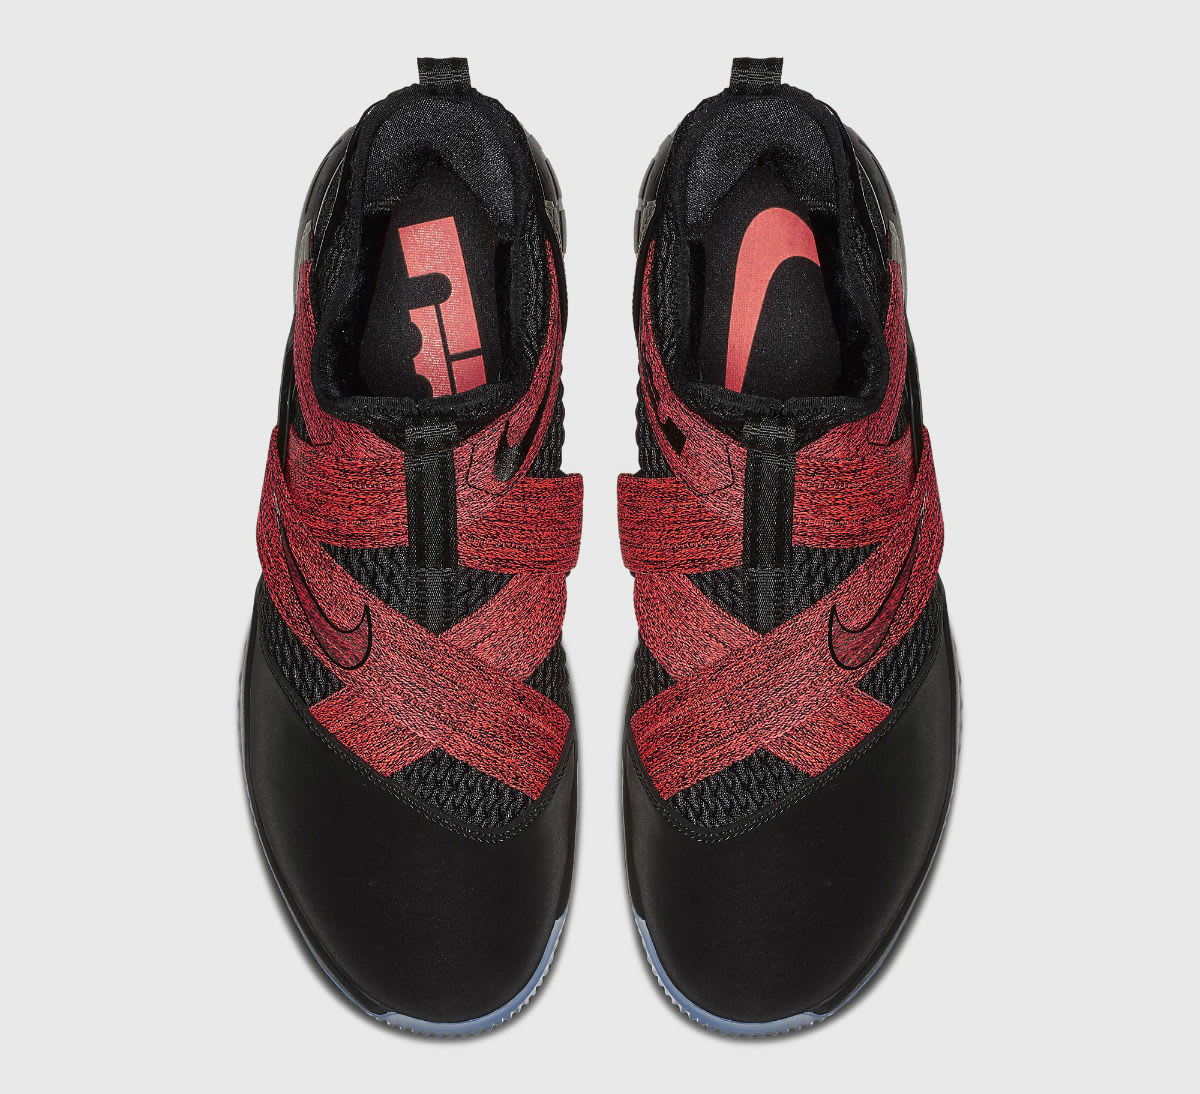 Nike LeBron Soldier 12 XII Bred Release Date AO2609-003 Top